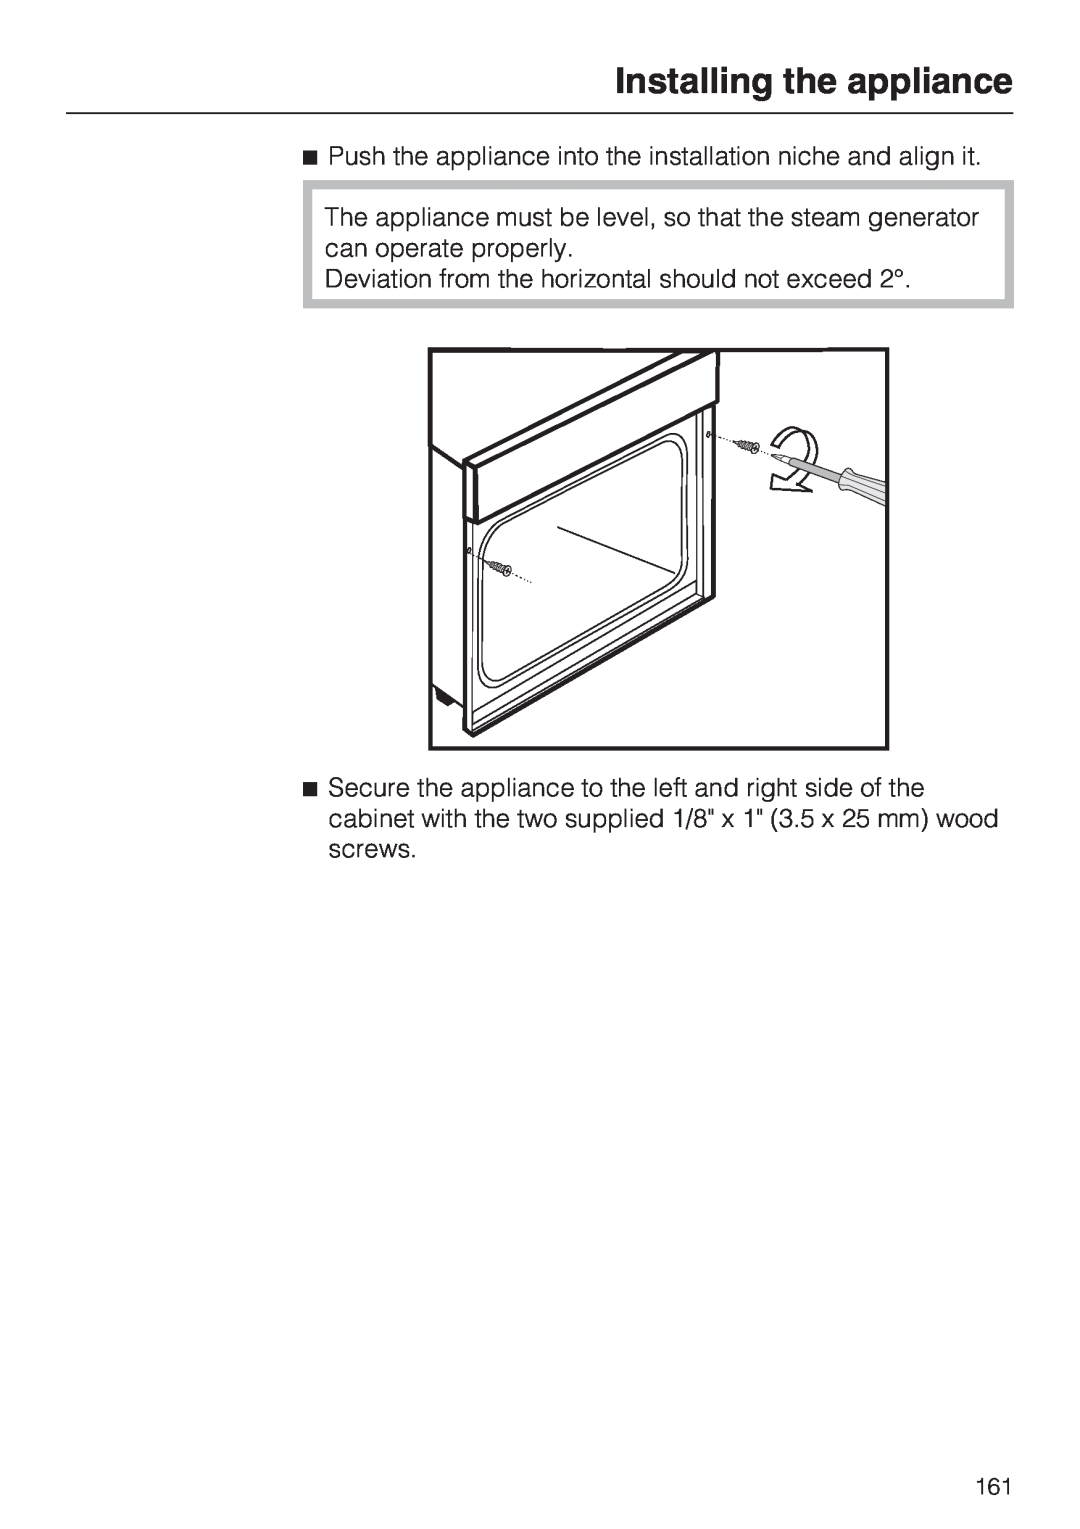 Miele 09 855 050 installation instructions Installing the appliance 